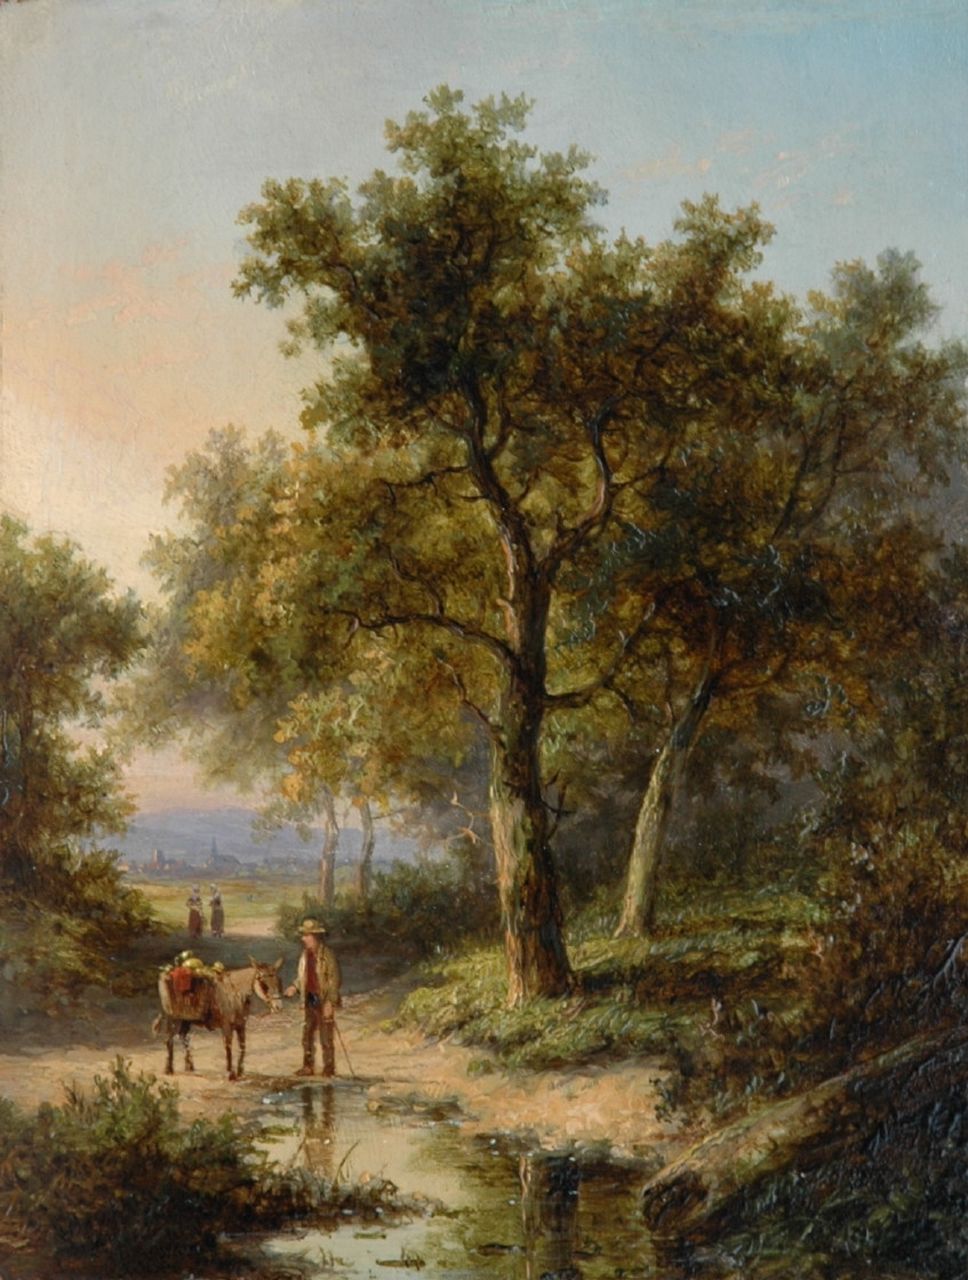 Morel II J.E.  | Jan Evert Morel II, Traveller with his pack mule on a forest path, oil on panel 18.1 x 13.7 cm, signed l.l.